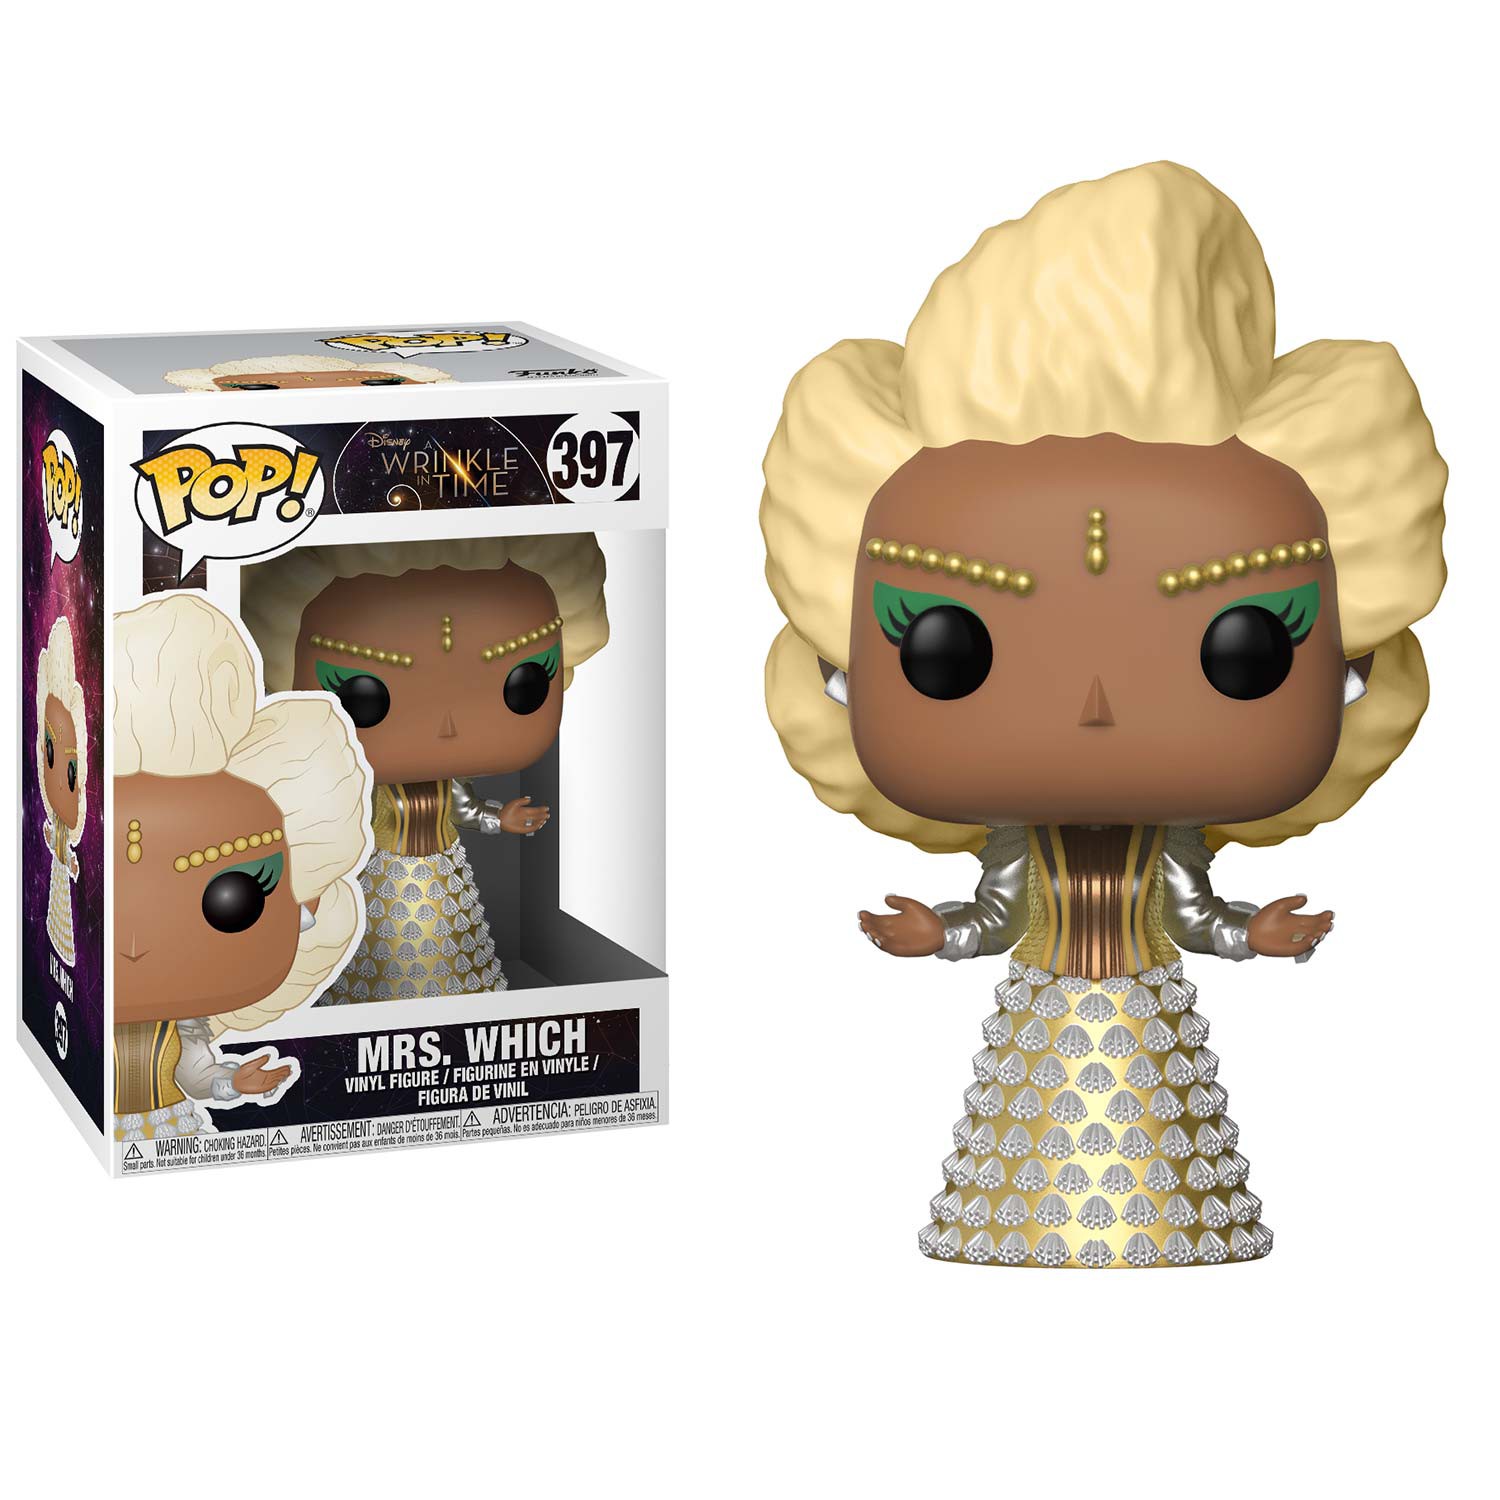 A Wrinkle In Time Mrs. Which Funko Pop Figure